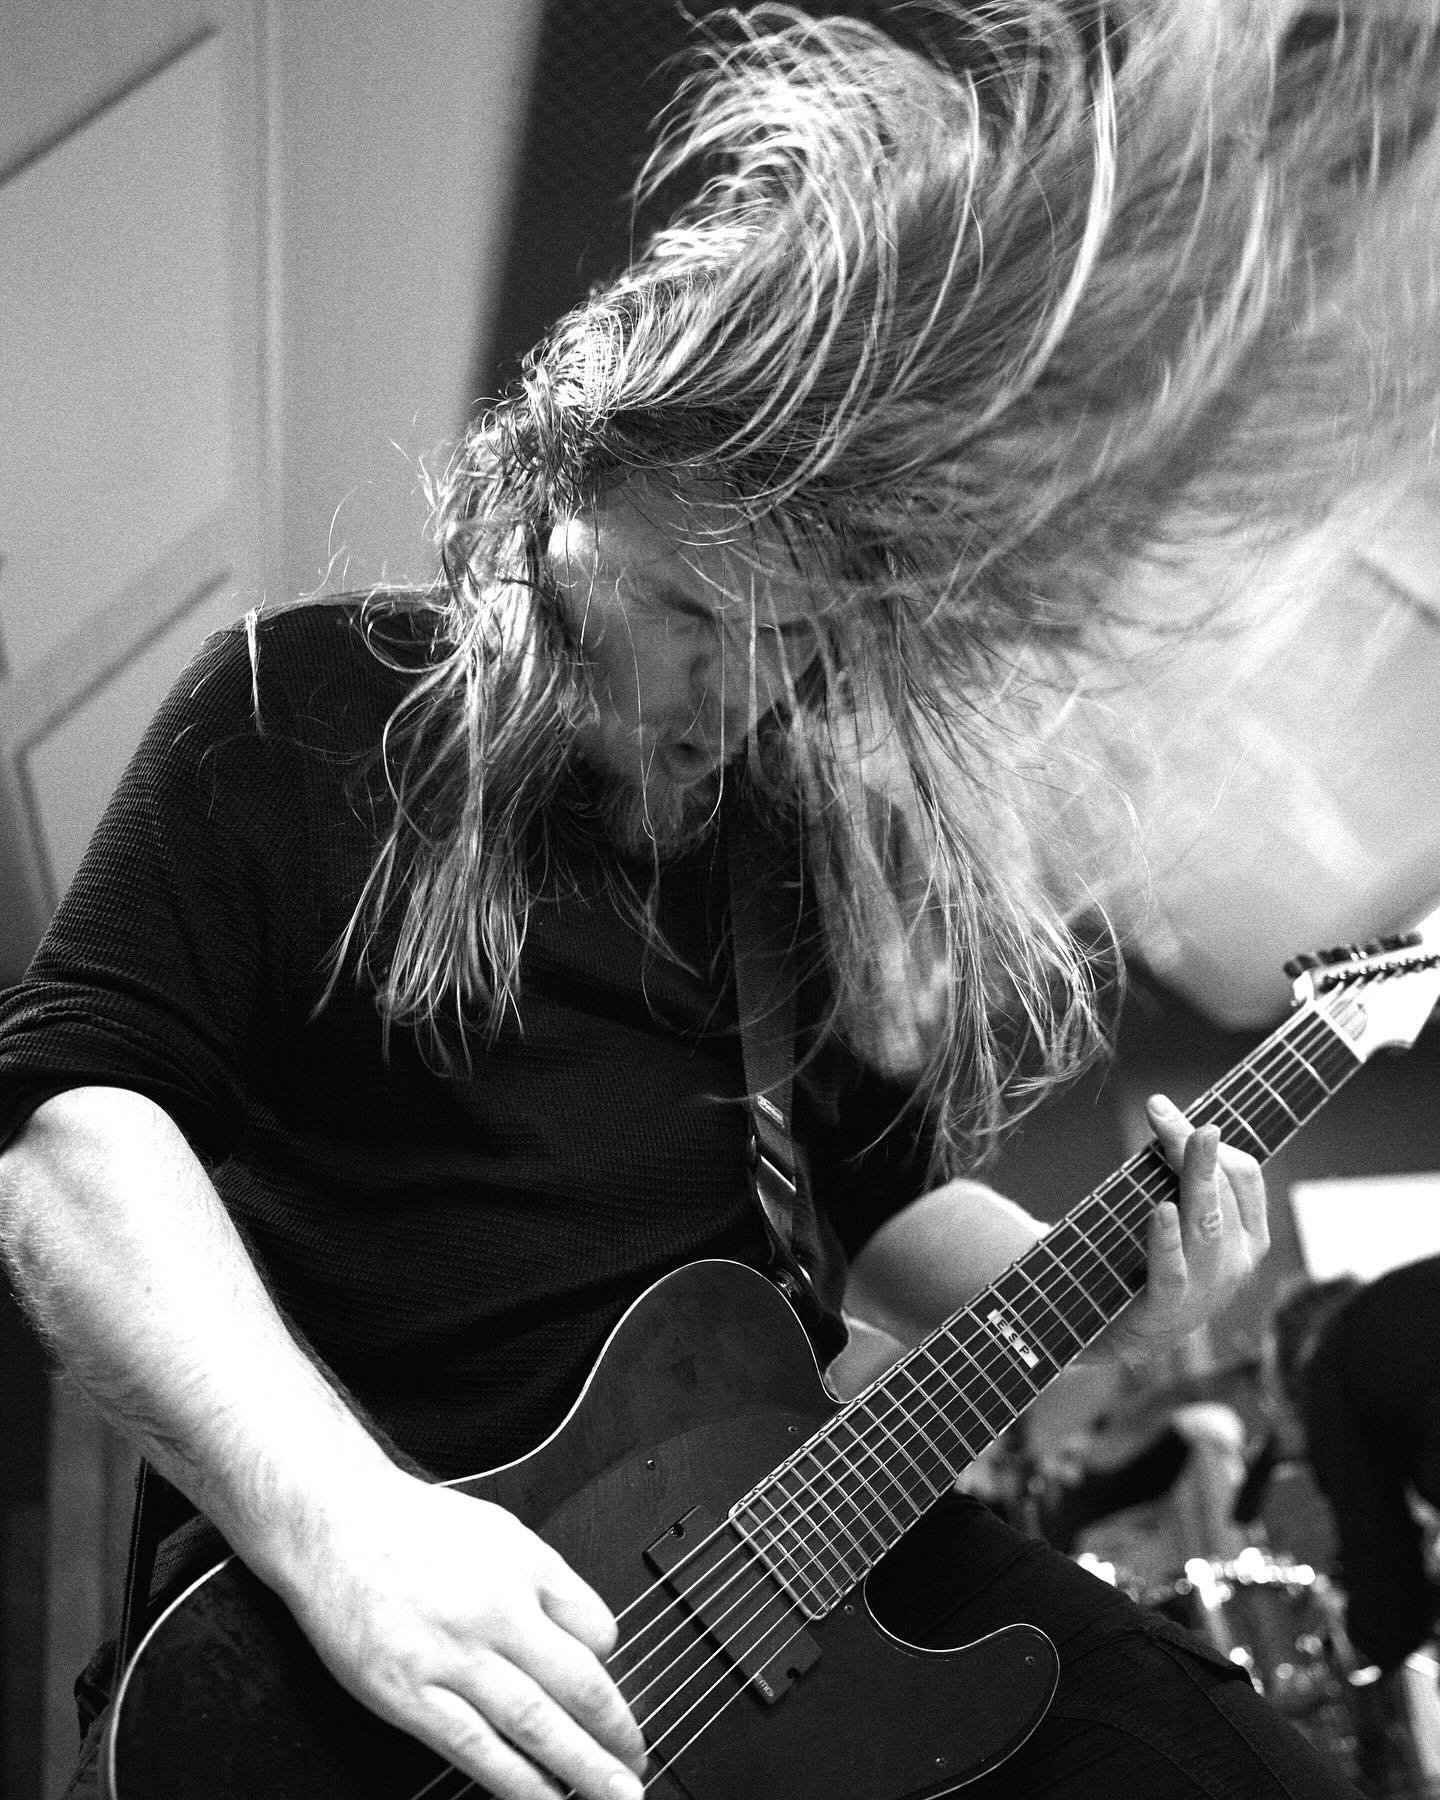 Say hello to our guitar wizard Jude! It&rsquo;s easy to see he can feel the bloody beat!!!
#killingdarlings #guitarist #goodvibes #musicians #metalguitarist